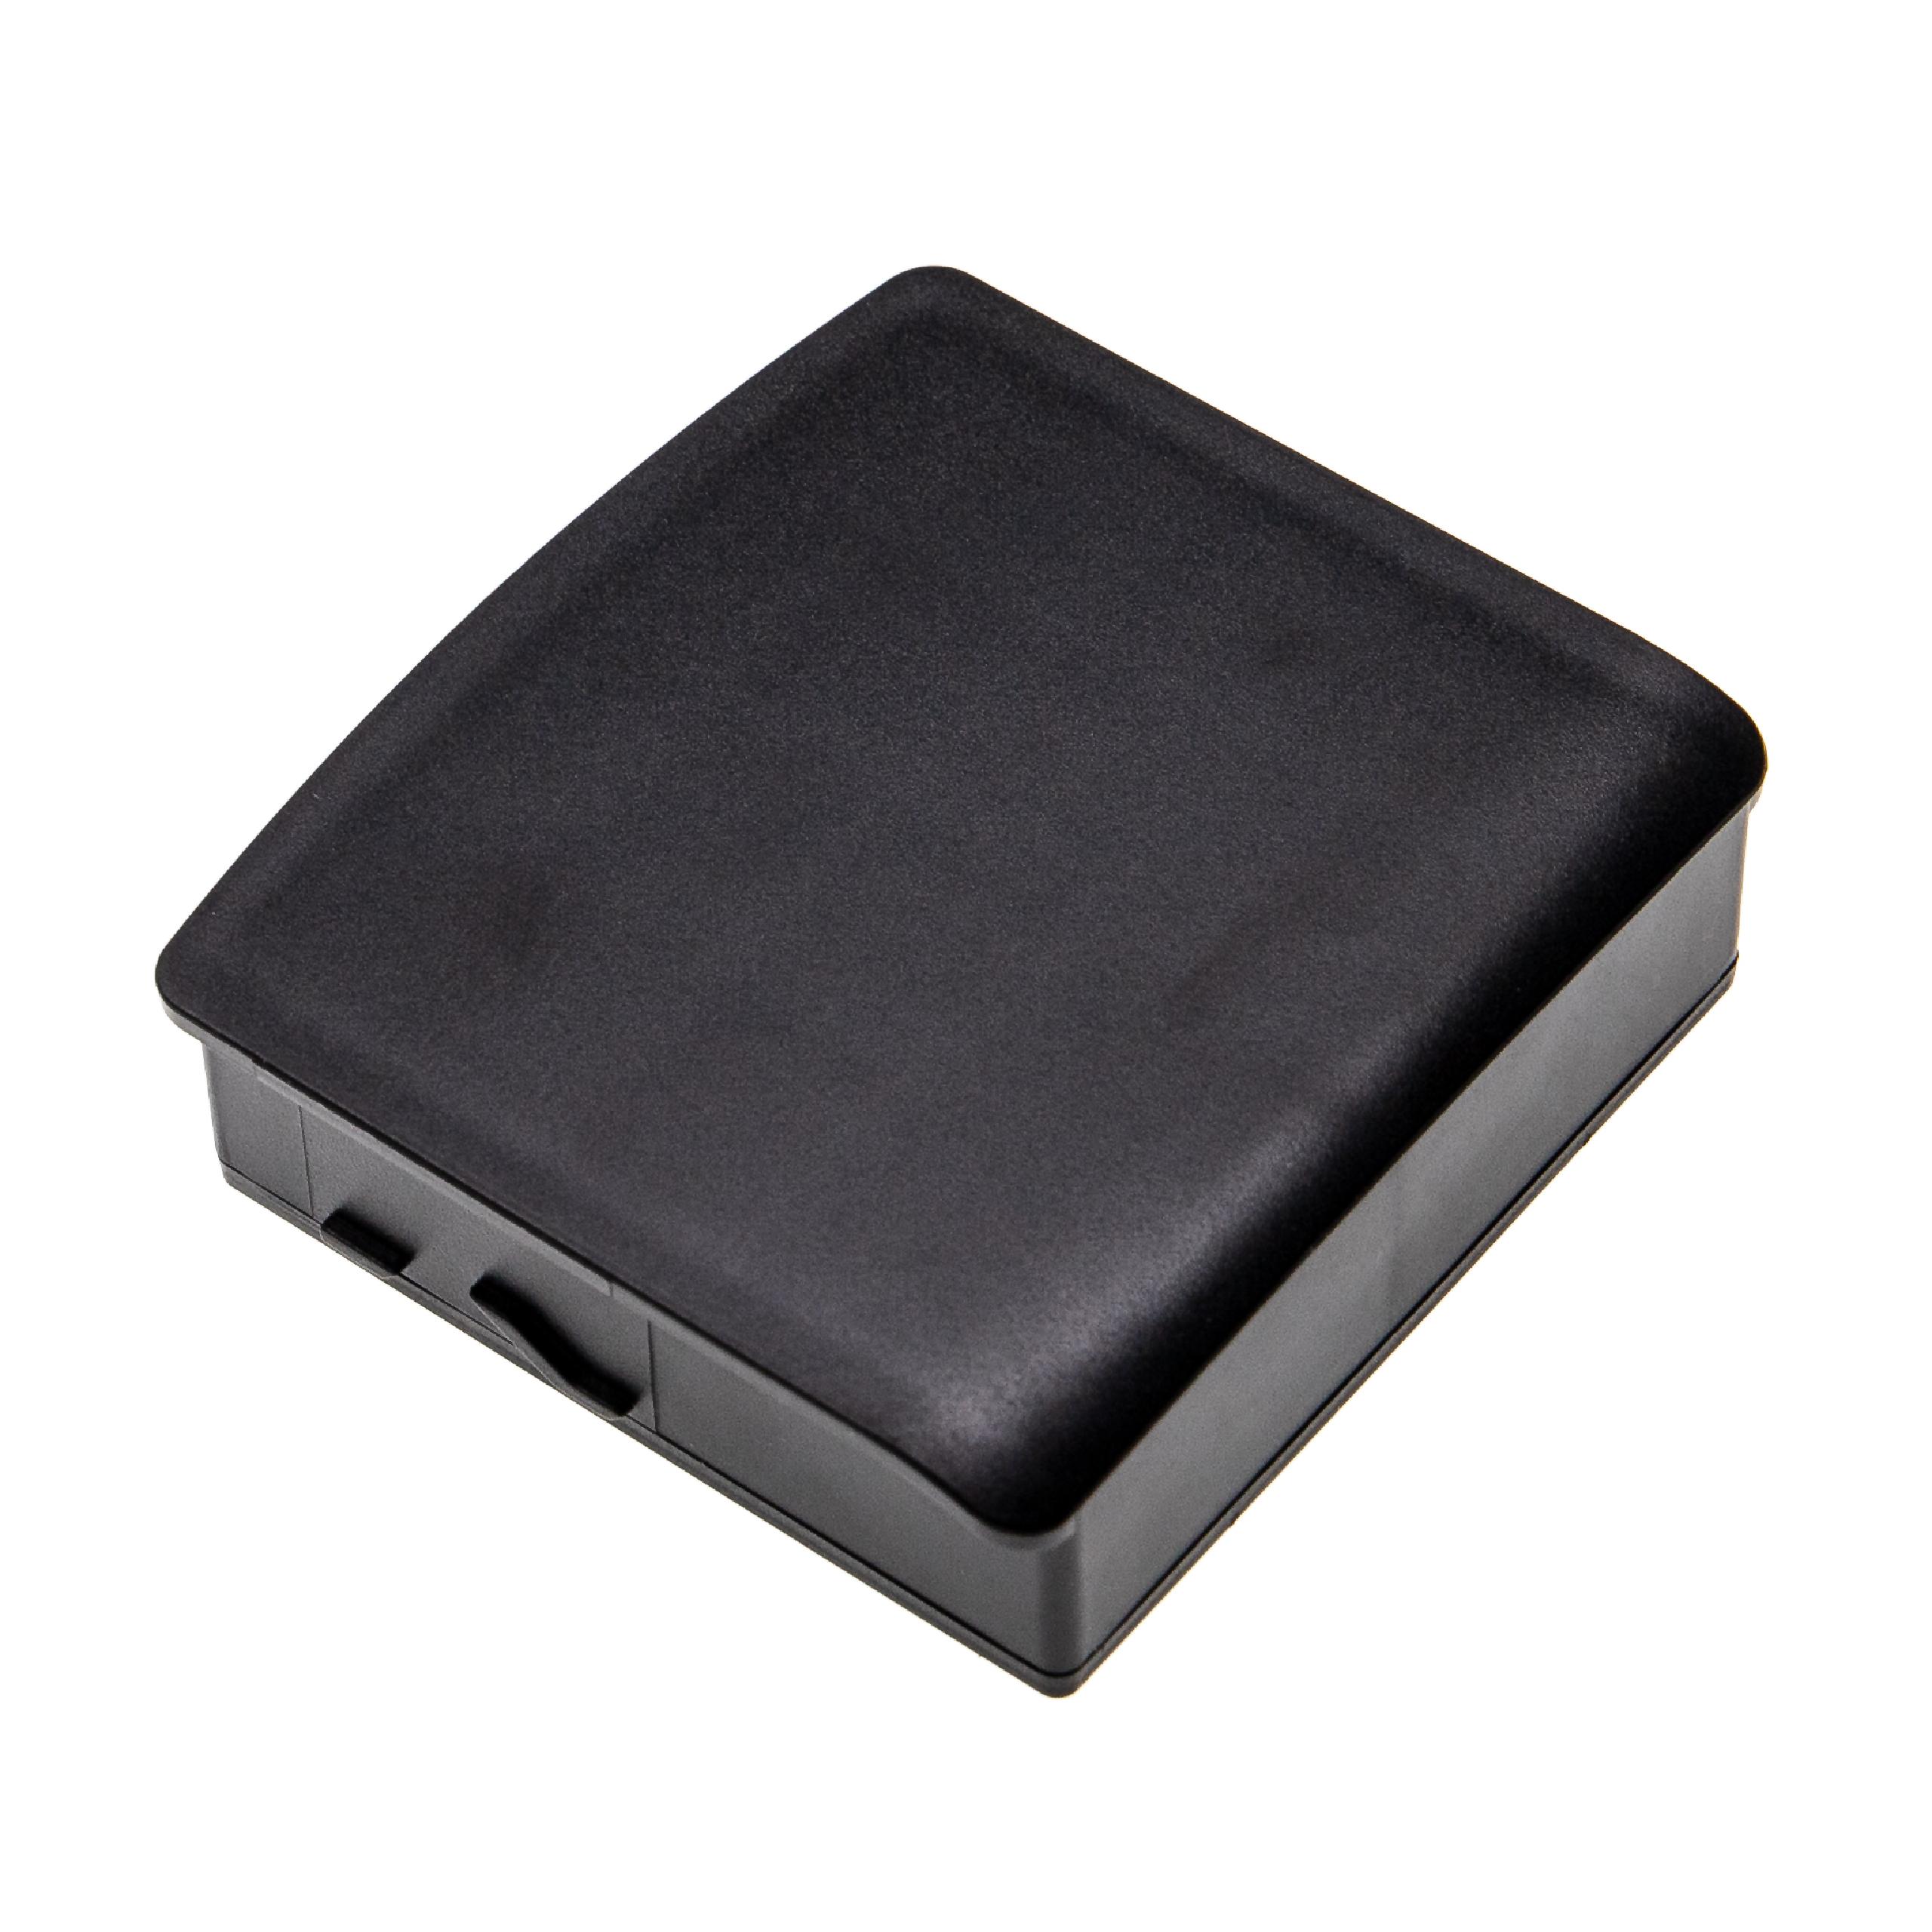 GPS Battery Replacement for Garmin 361-00055-00, 010-11756-04 - 5200mAh, 7.4V